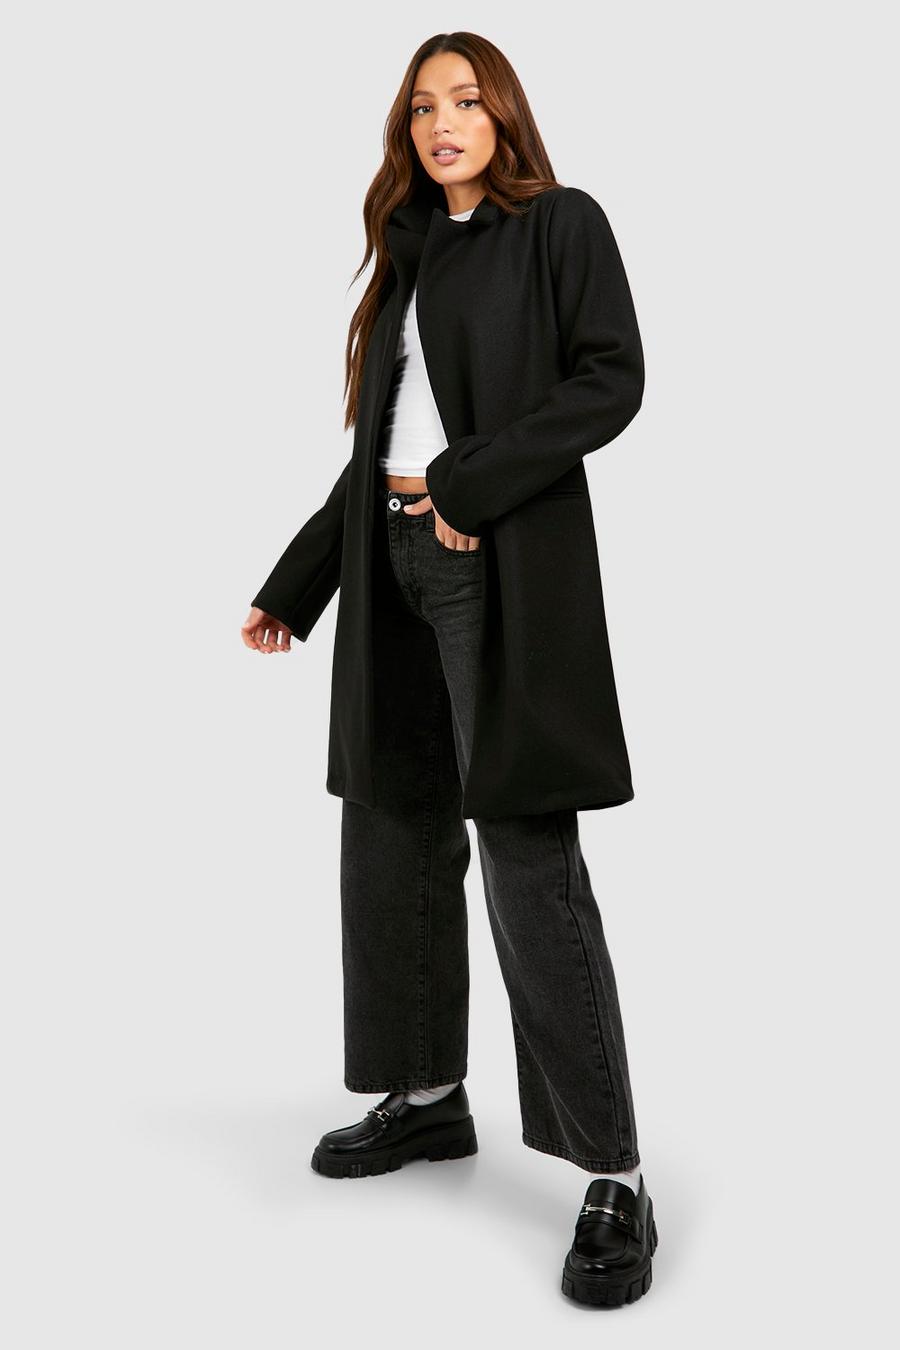 Black Tall Tailored Wool Look Coat image number 1